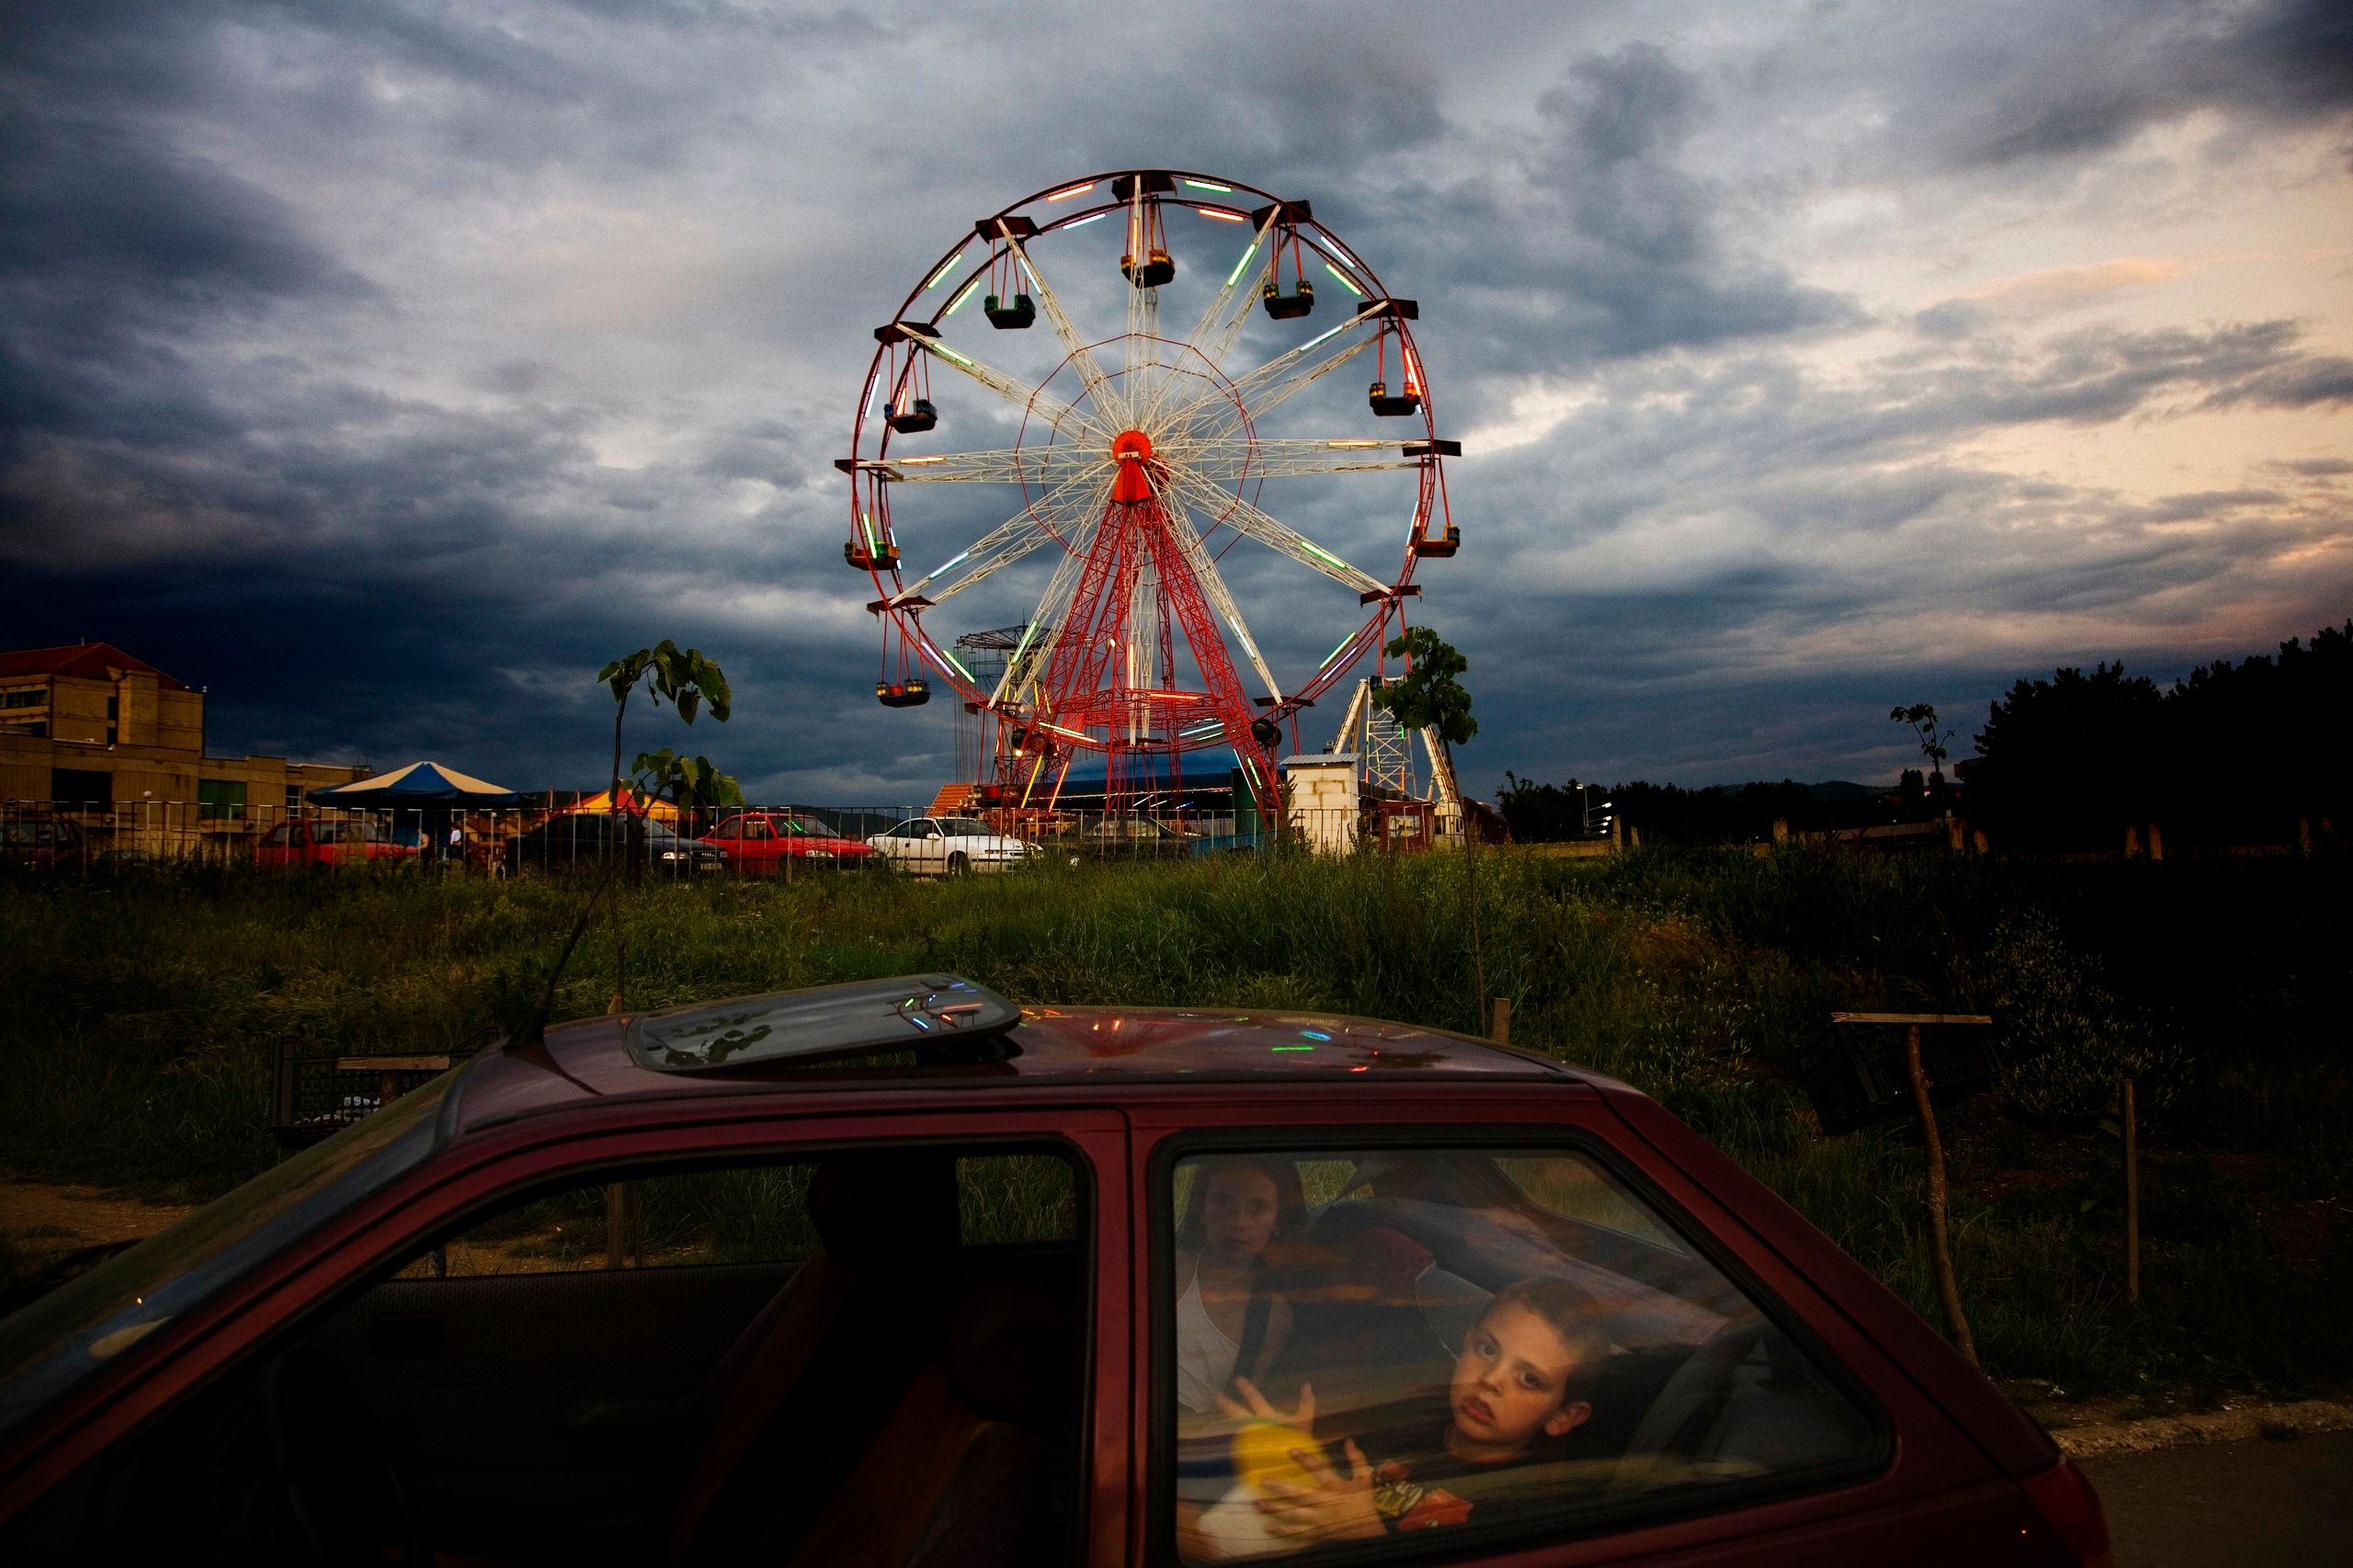 Foreground: kids in the back of a car. Background: Ferris wheel in front of a stormy sky.